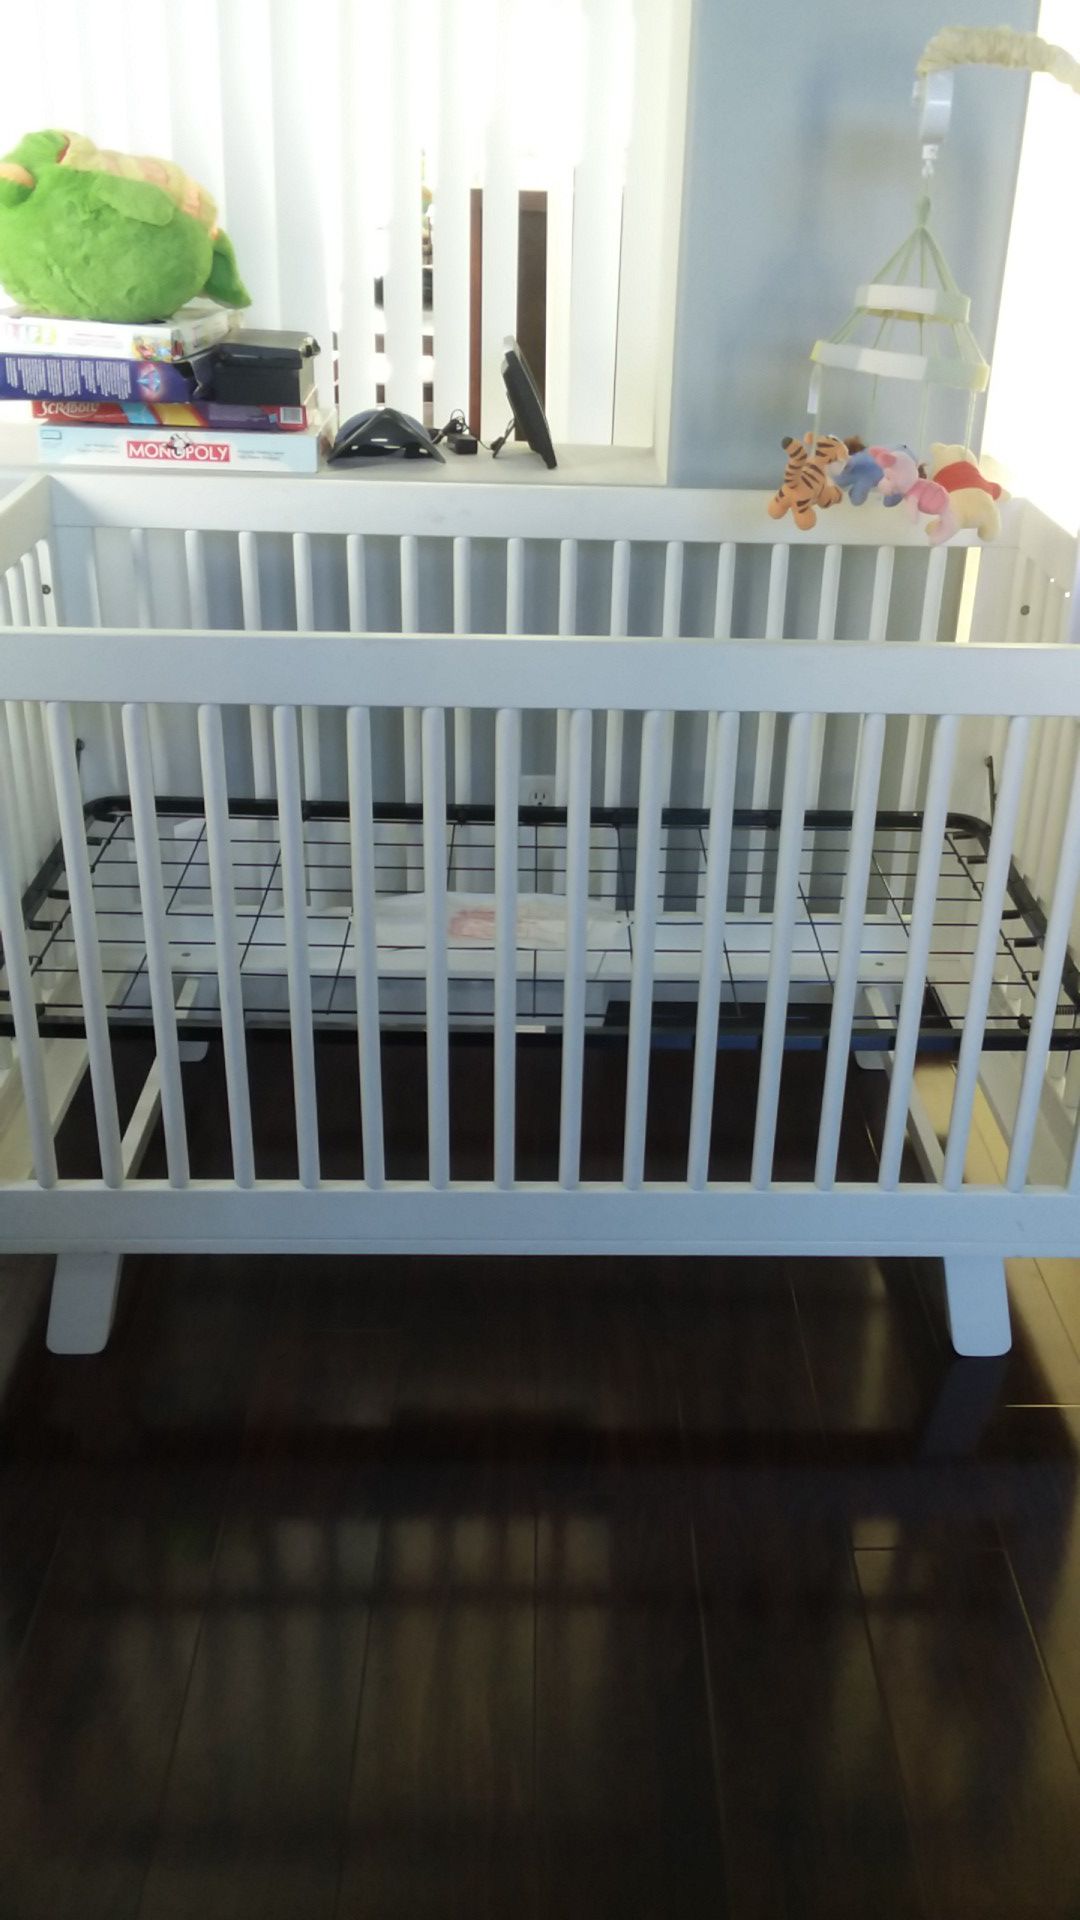 Crib - Converts to toddler bed